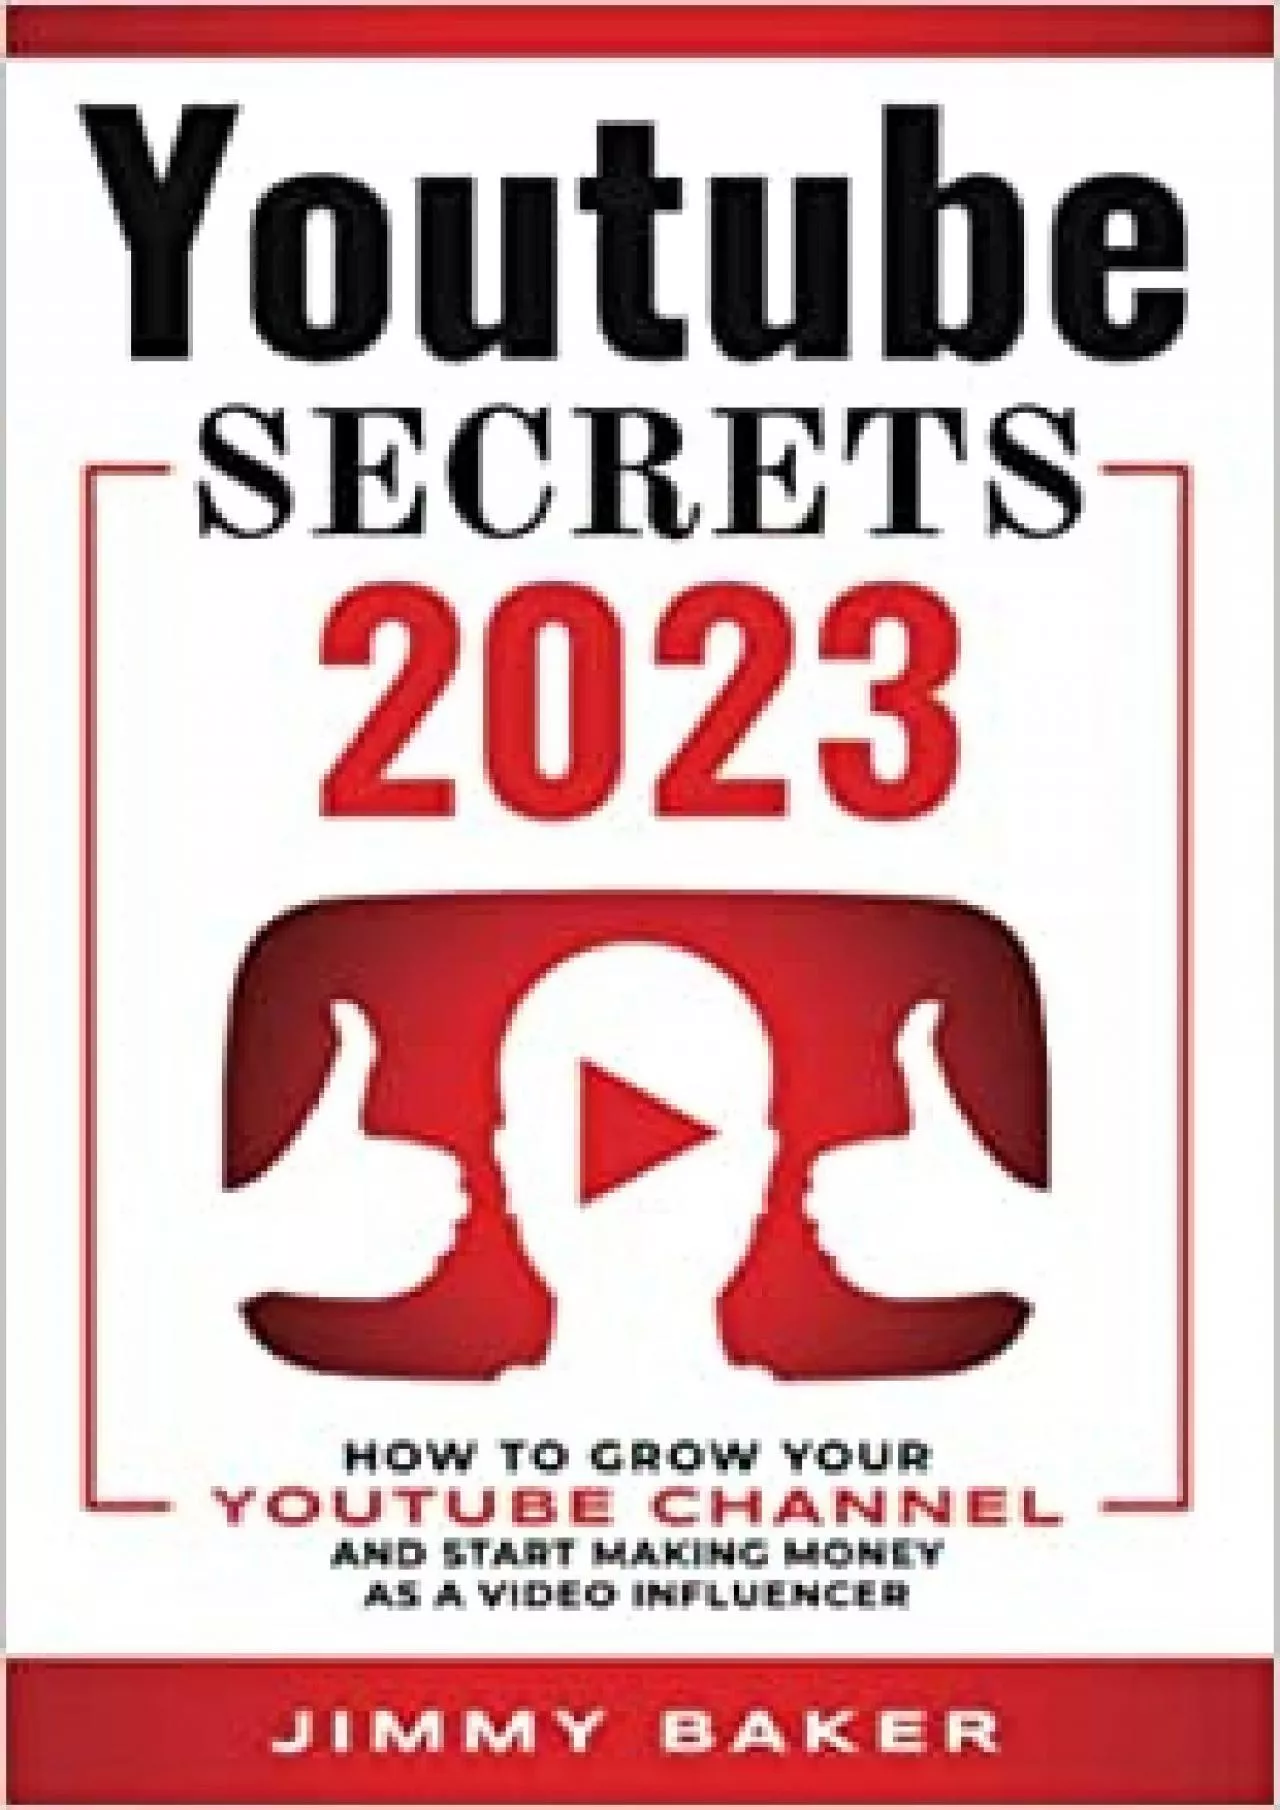 YOUTUBE SECRETS 2023 HOW TO GROW YOUR YOUTUBE CHANNEL AND START MAKING MONEY AS A VIDEO